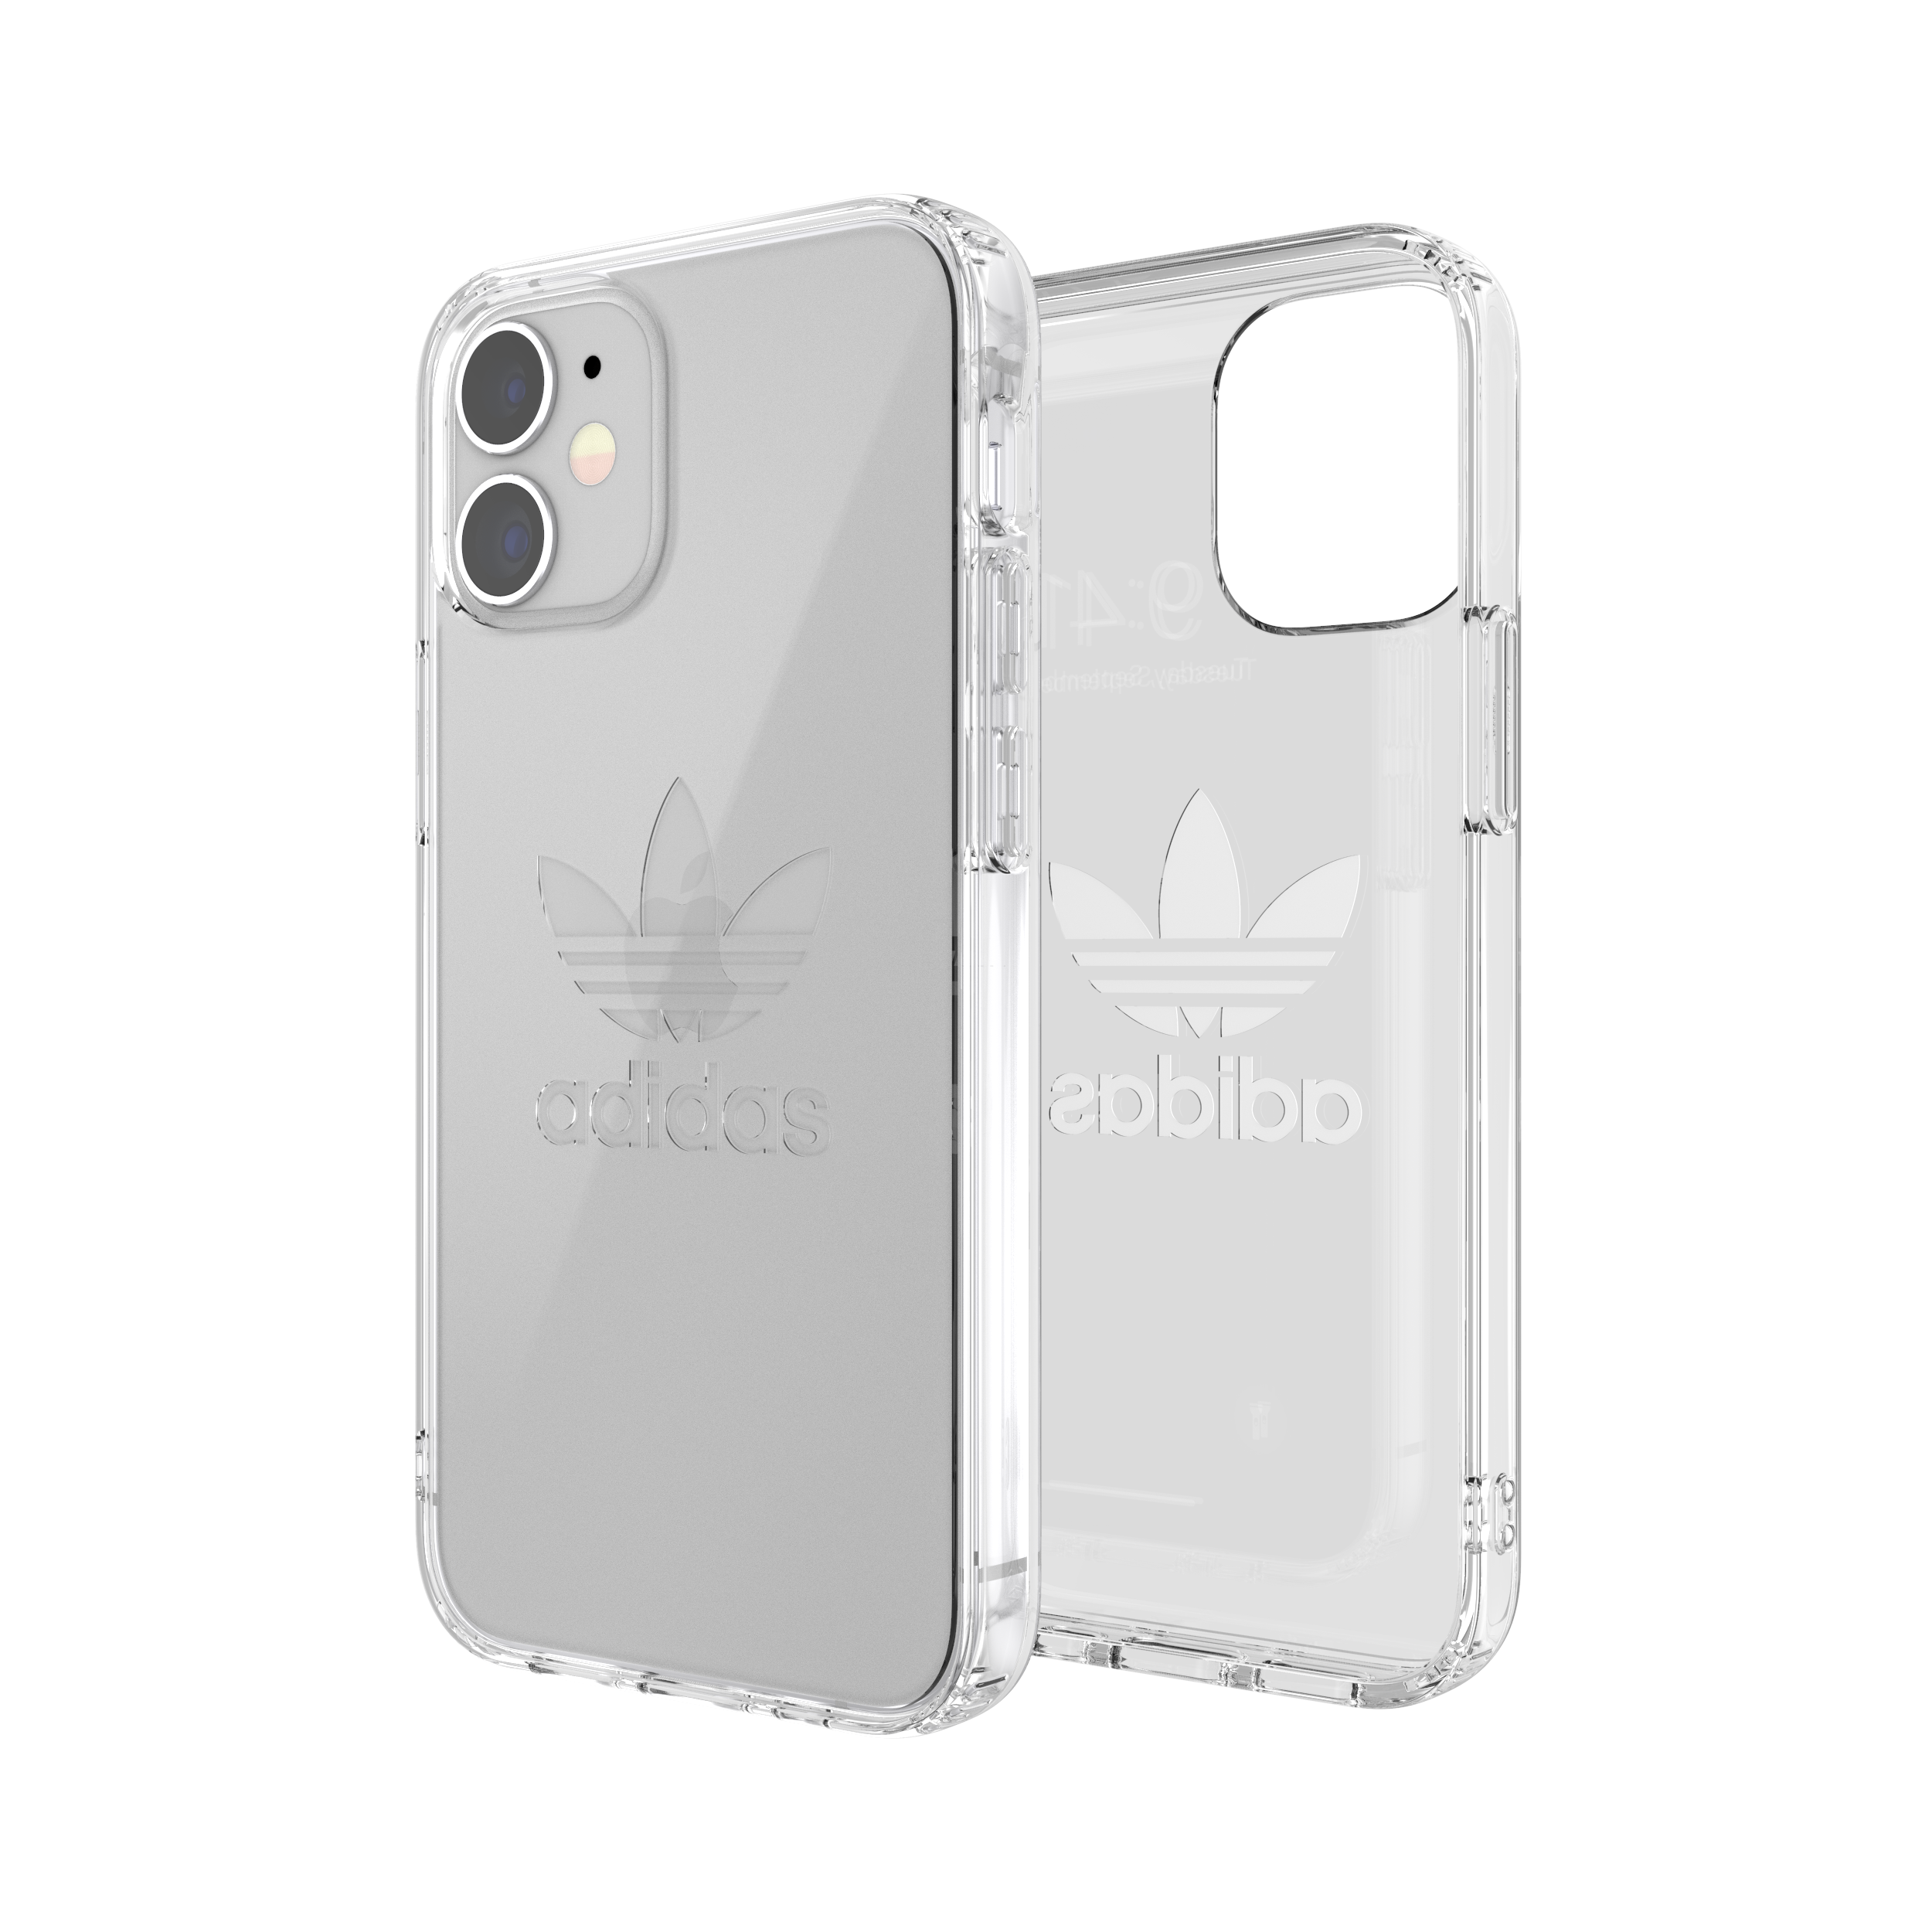 Adidas ORIGINALS Apple iPhone 12 Mini Protective Clear Case - Back cover w/ Trefoil Design, Scratch & Drop Protection w/ TPU Bumper & Air Cushion, Wireless Charging Compatible - Clear